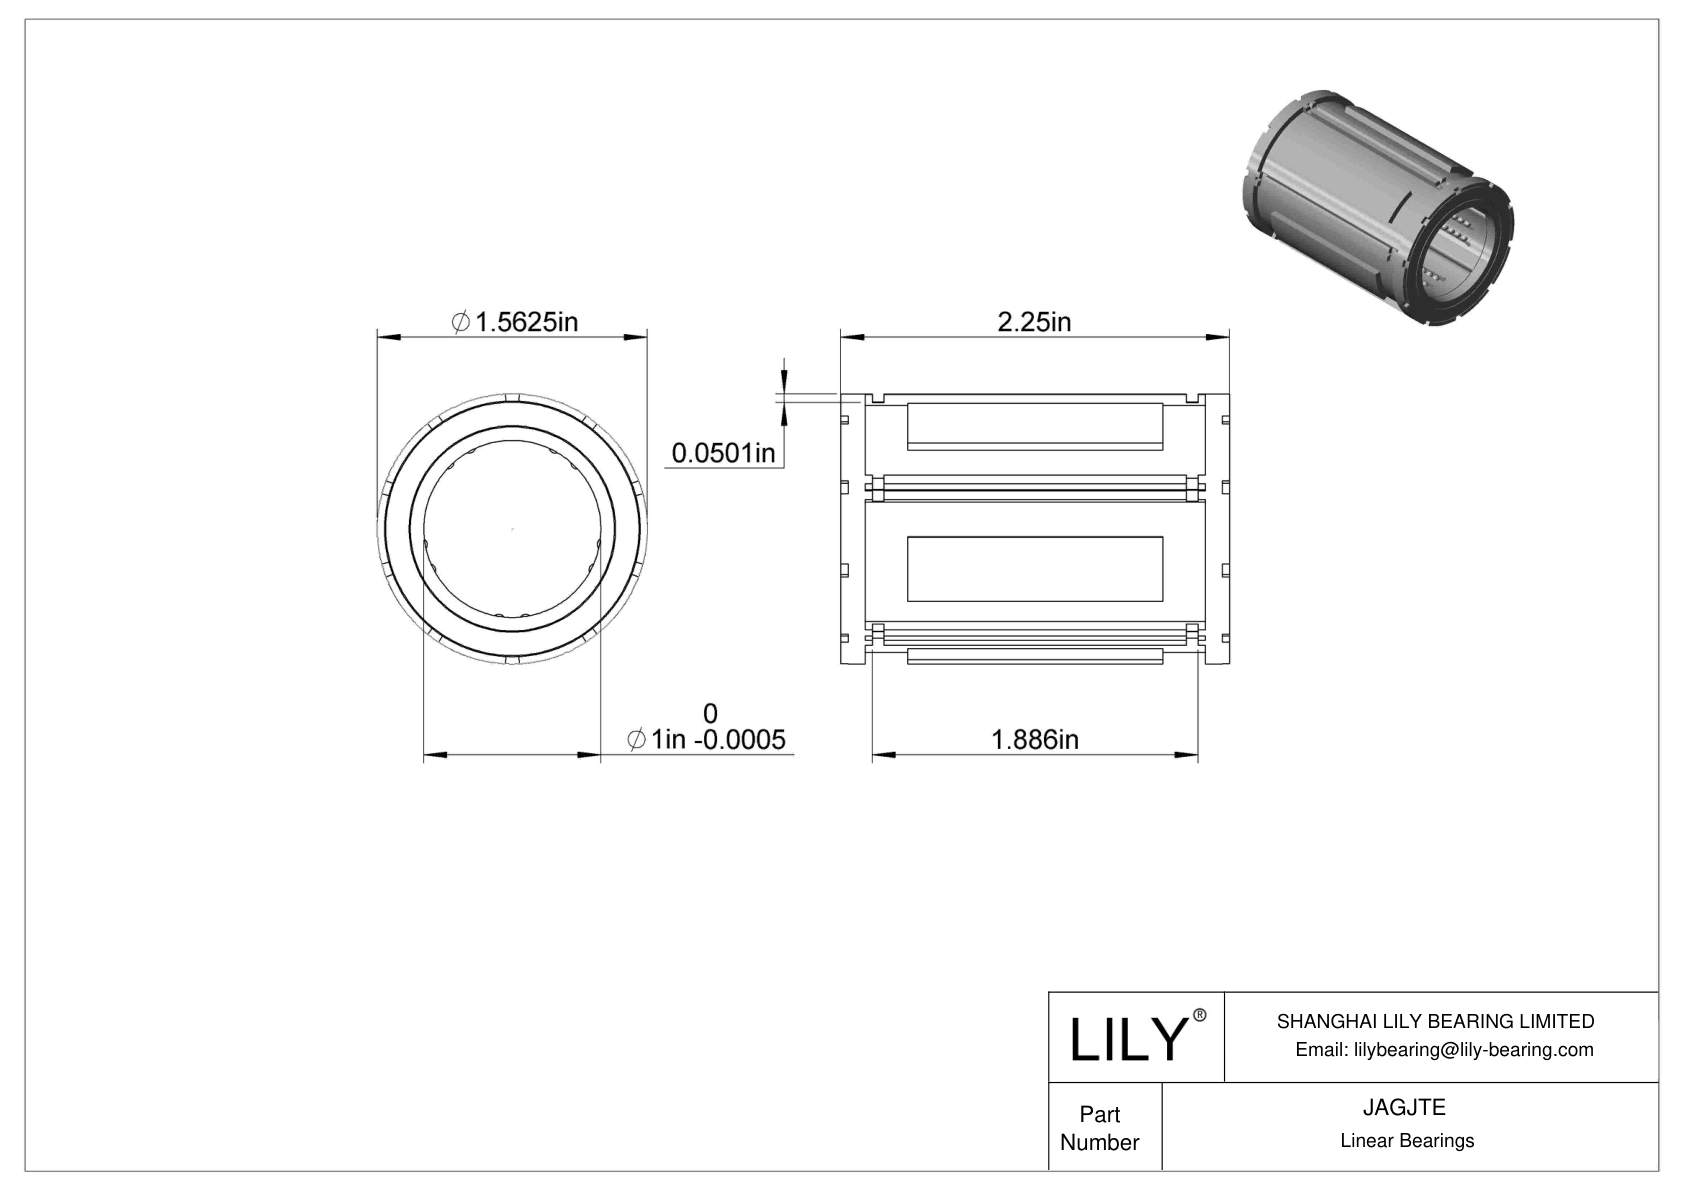 JAGJTE Common Linear Ball Bearings cad drawing